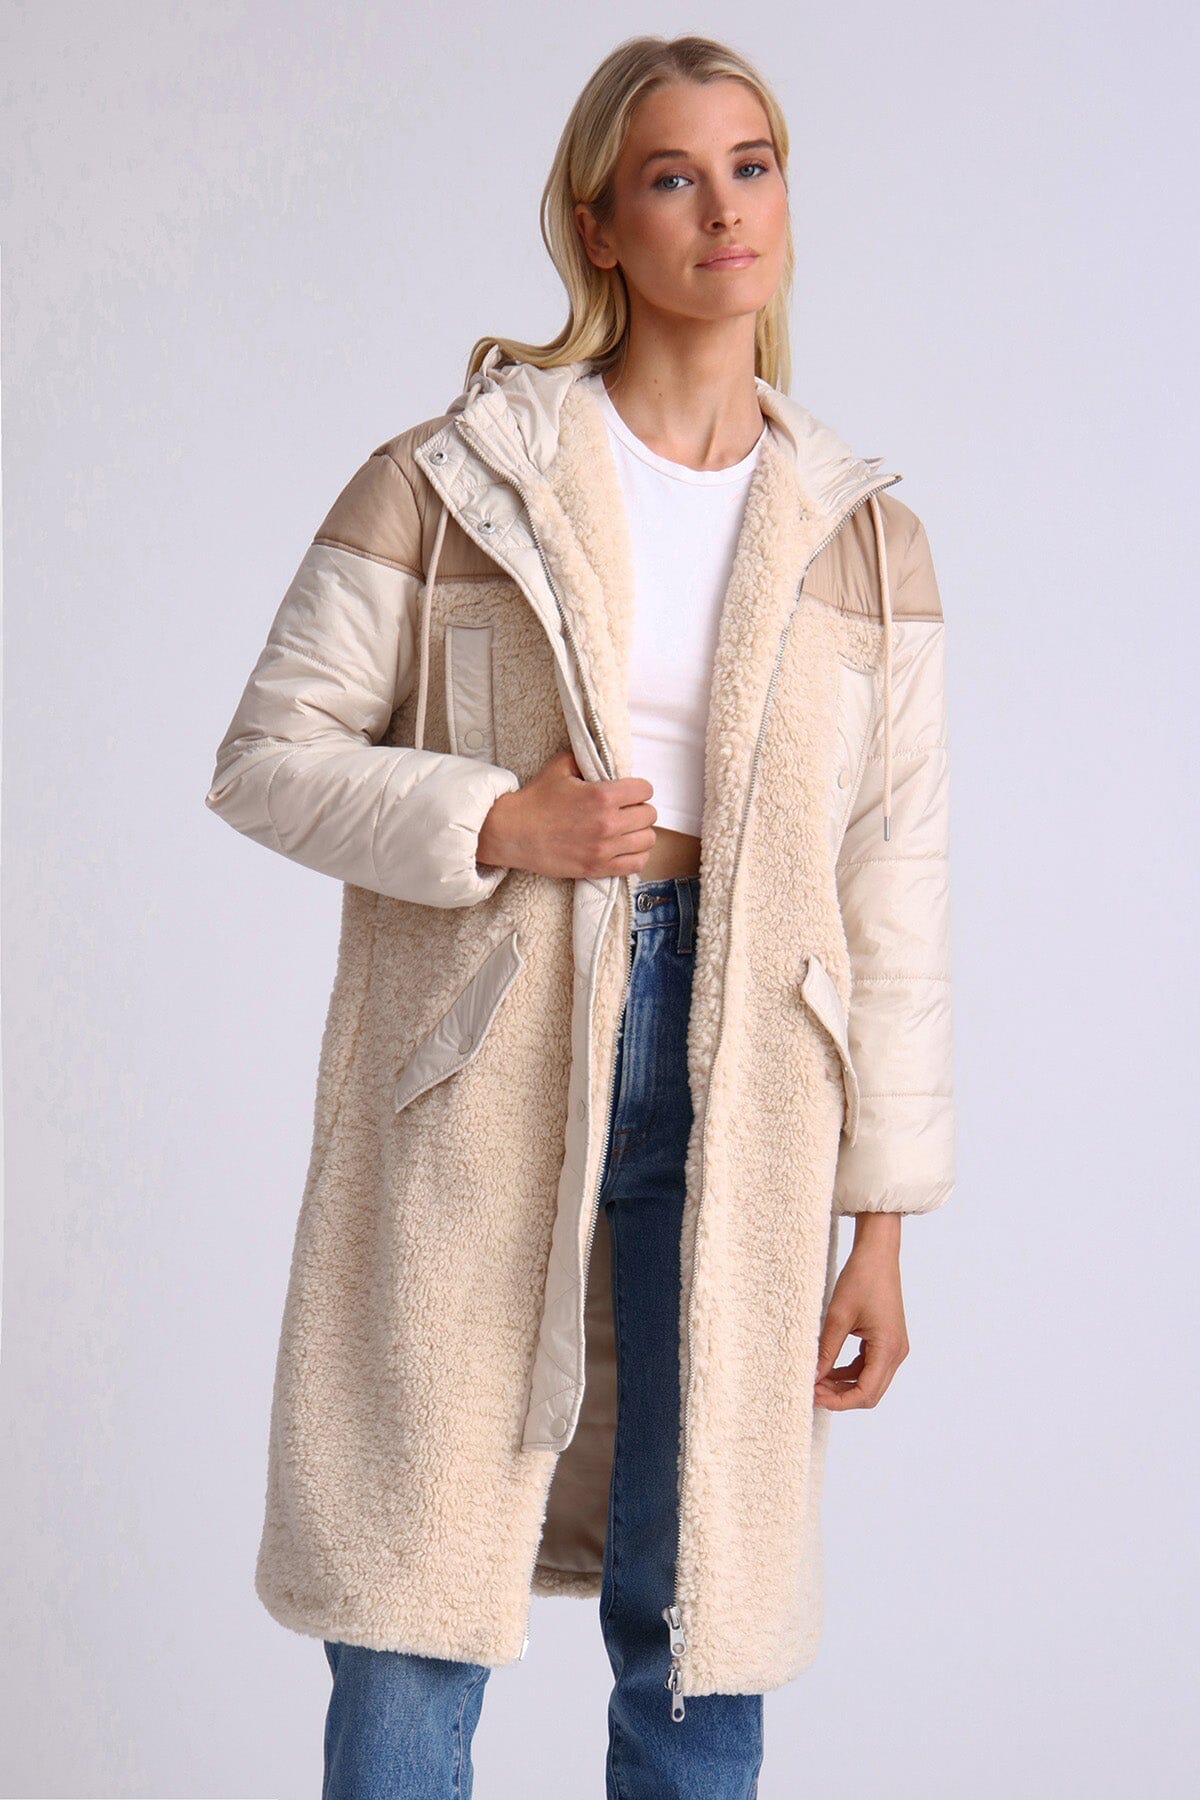 Oat beige quilted anorak faux fur long coat casual outfit outerwear